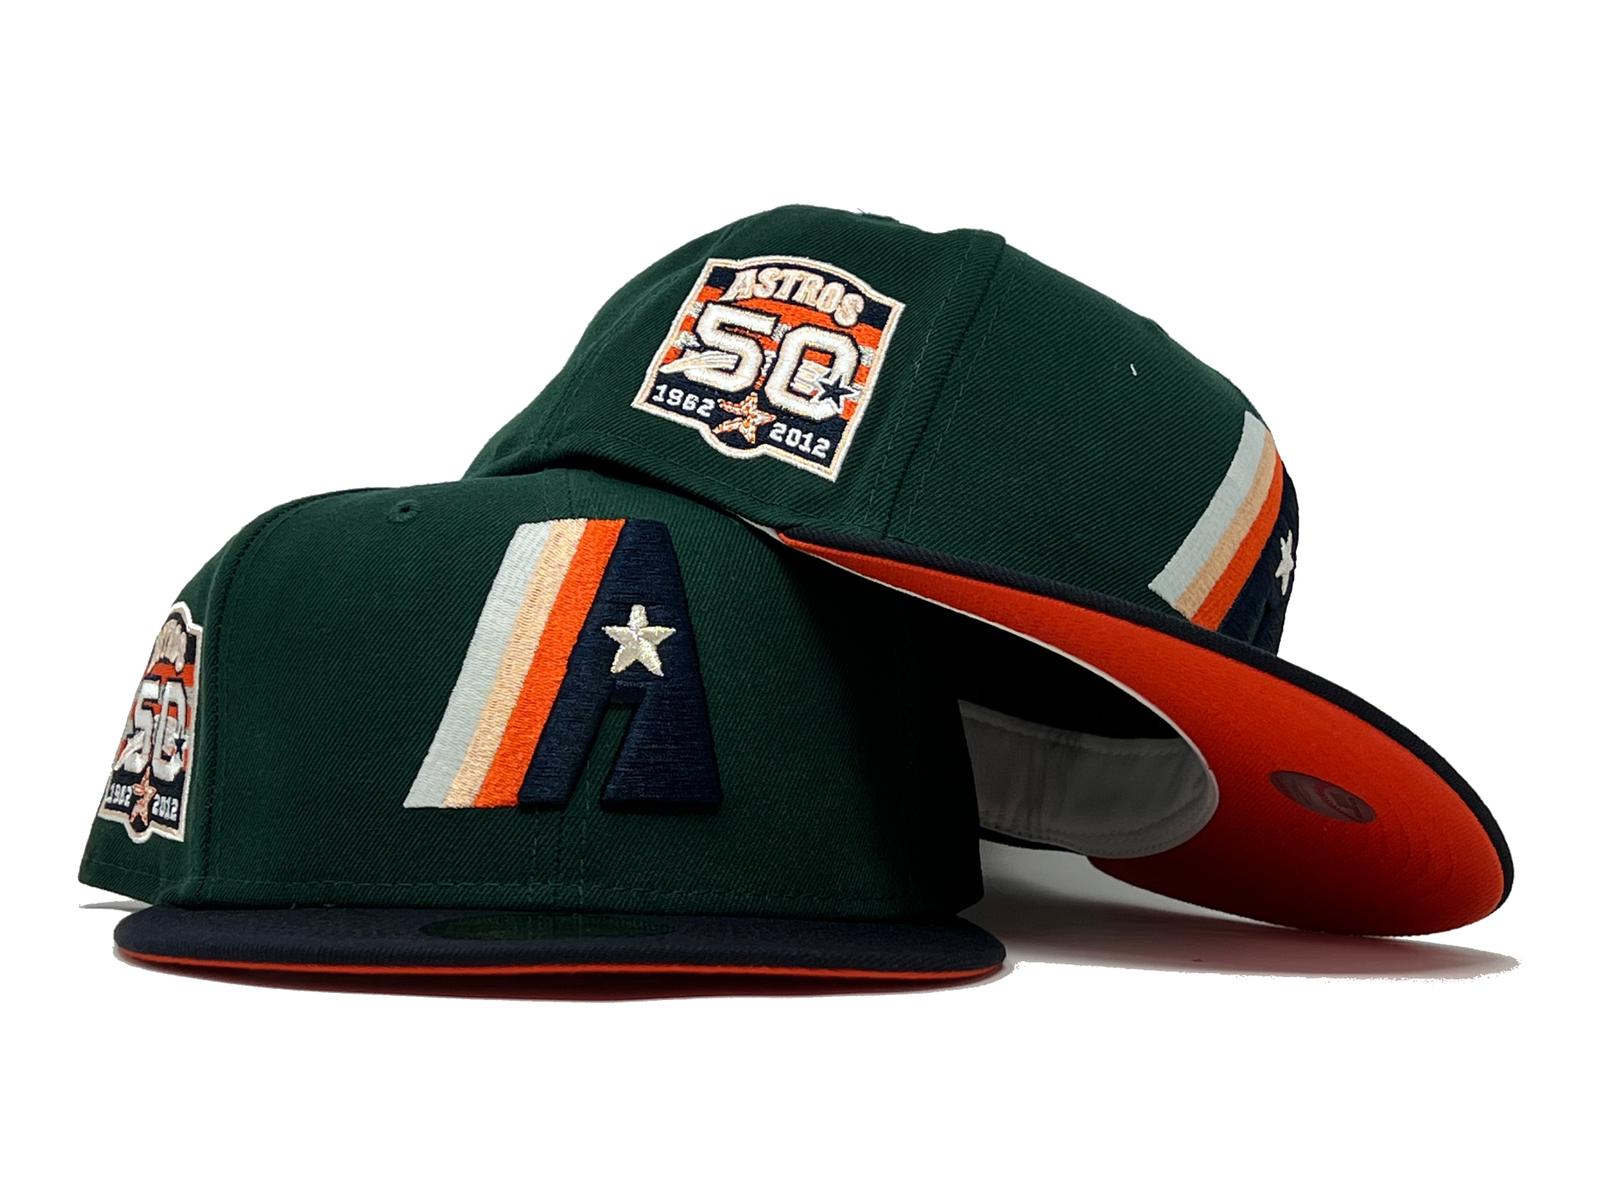 Los Astros 50 Years New Era 59FIFTY Fitted Hat (Chrome White Black Green Under BRIM) 7 1/2